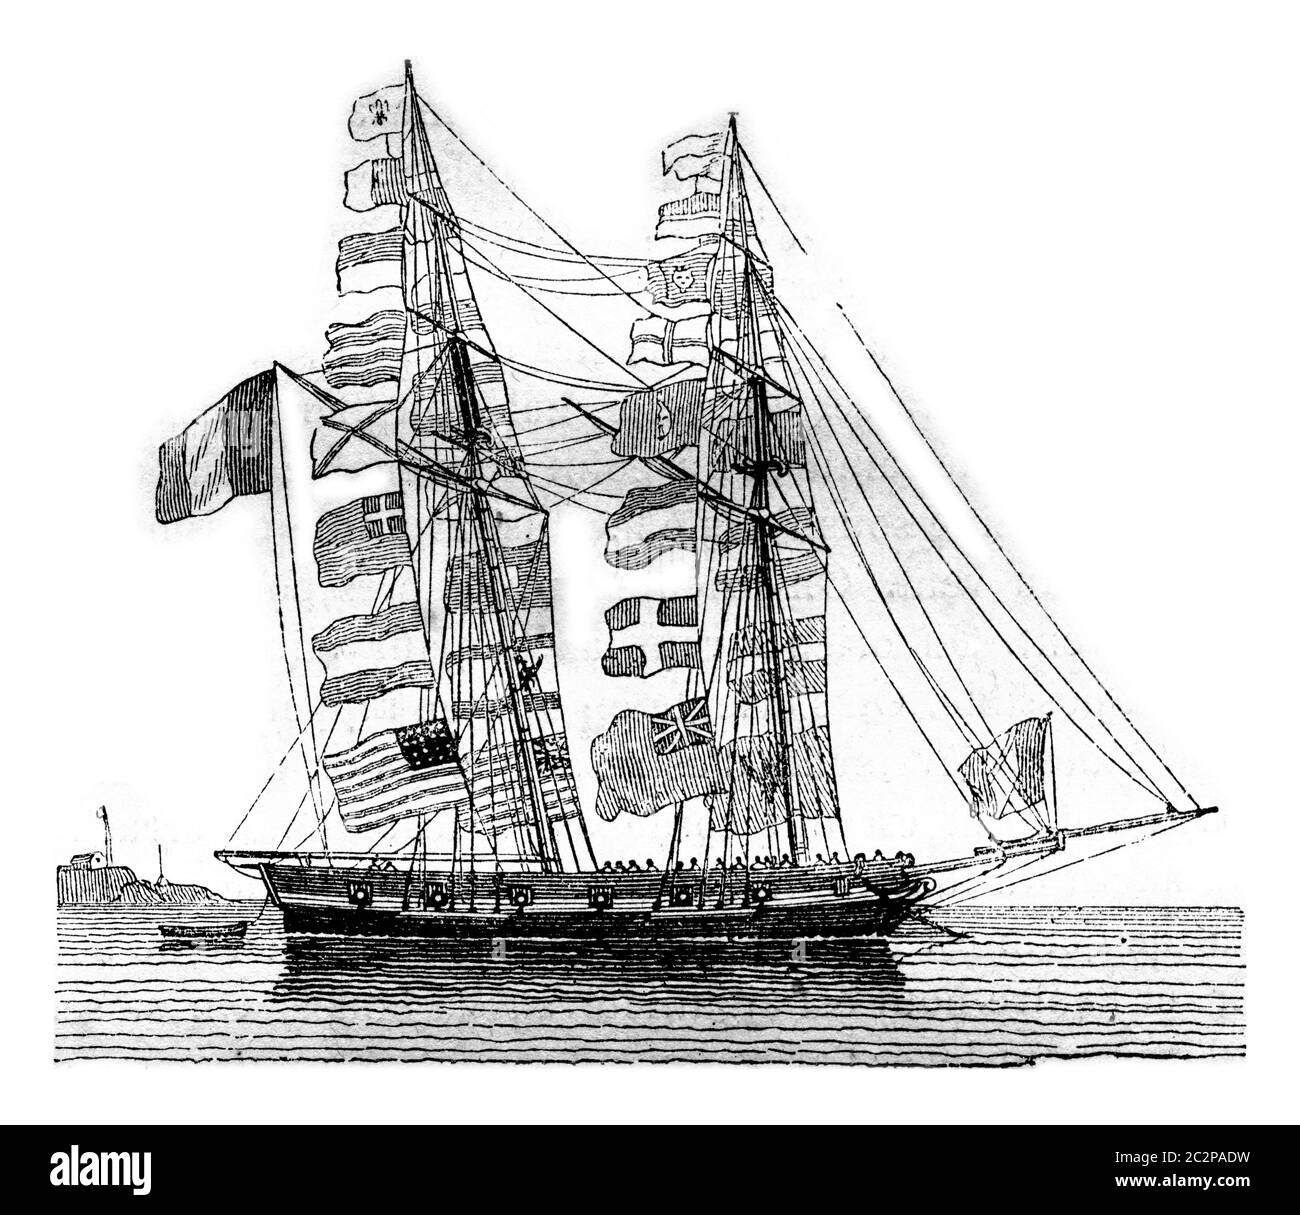 Pavoisse schooner, wetted, seen by starboard boudoir, vintage engraved illustration. Magasin Pittoresque 1842. Stock Photo